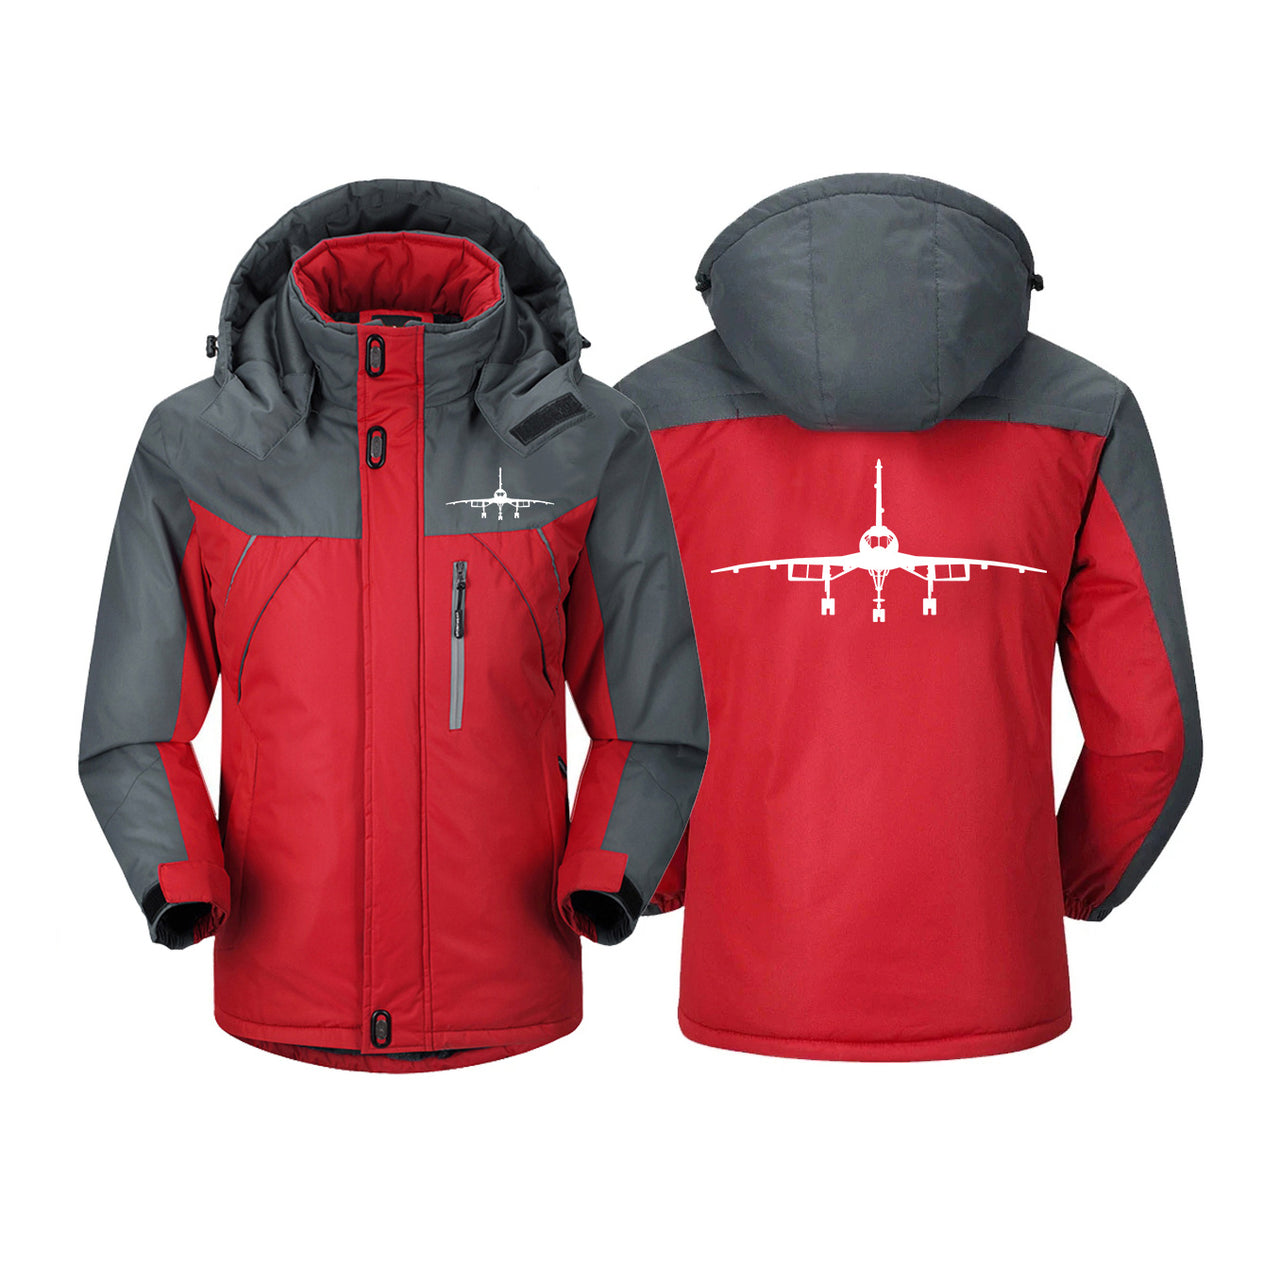 Concorde Silhouette Designed Thick Winter Jackets